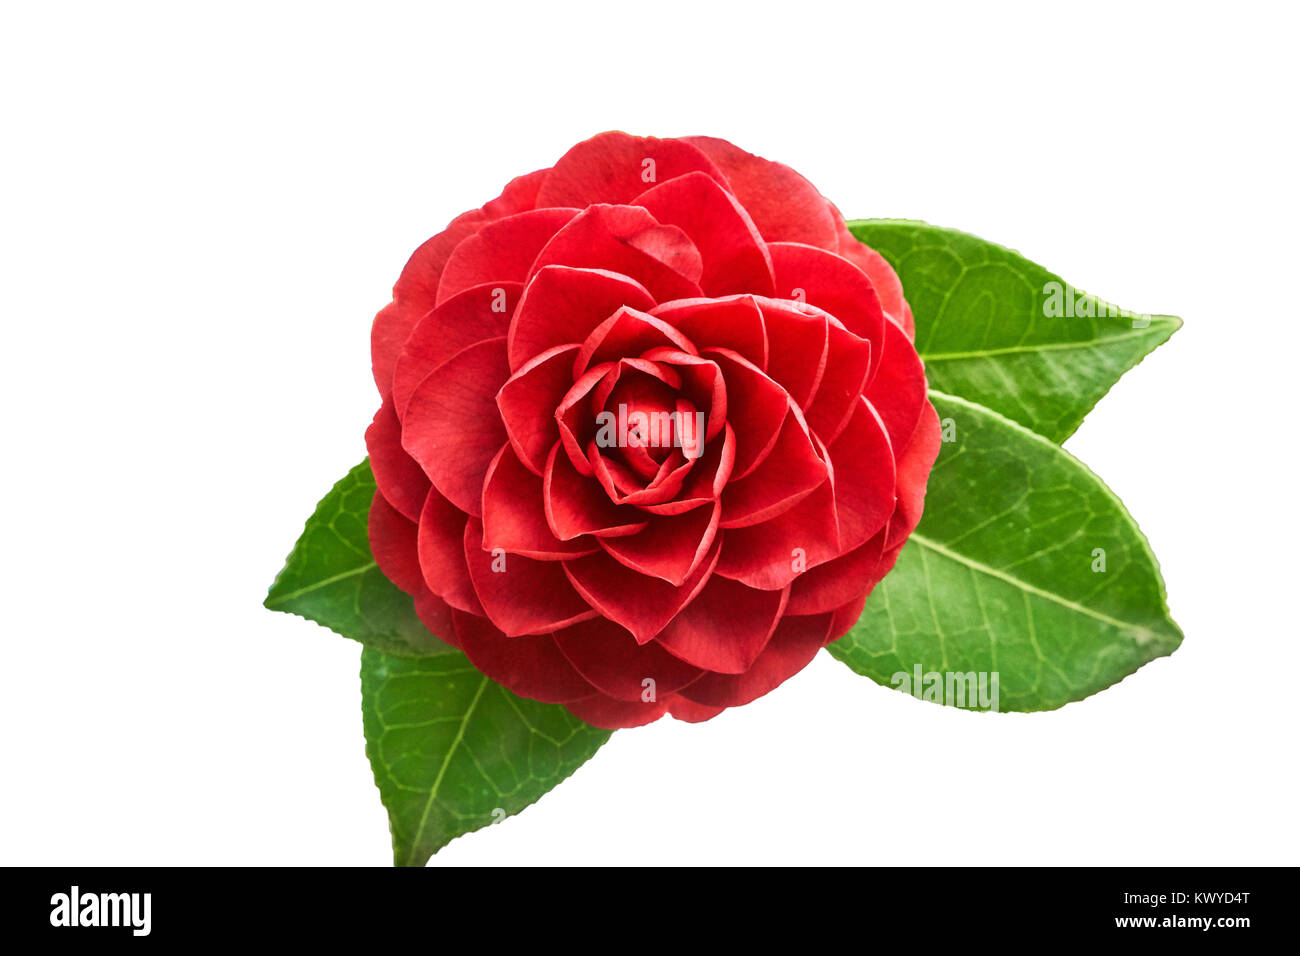 Closeup of Camellia japonica flower, which is commonly knwon as camellia or rose of winter. Stock Photo